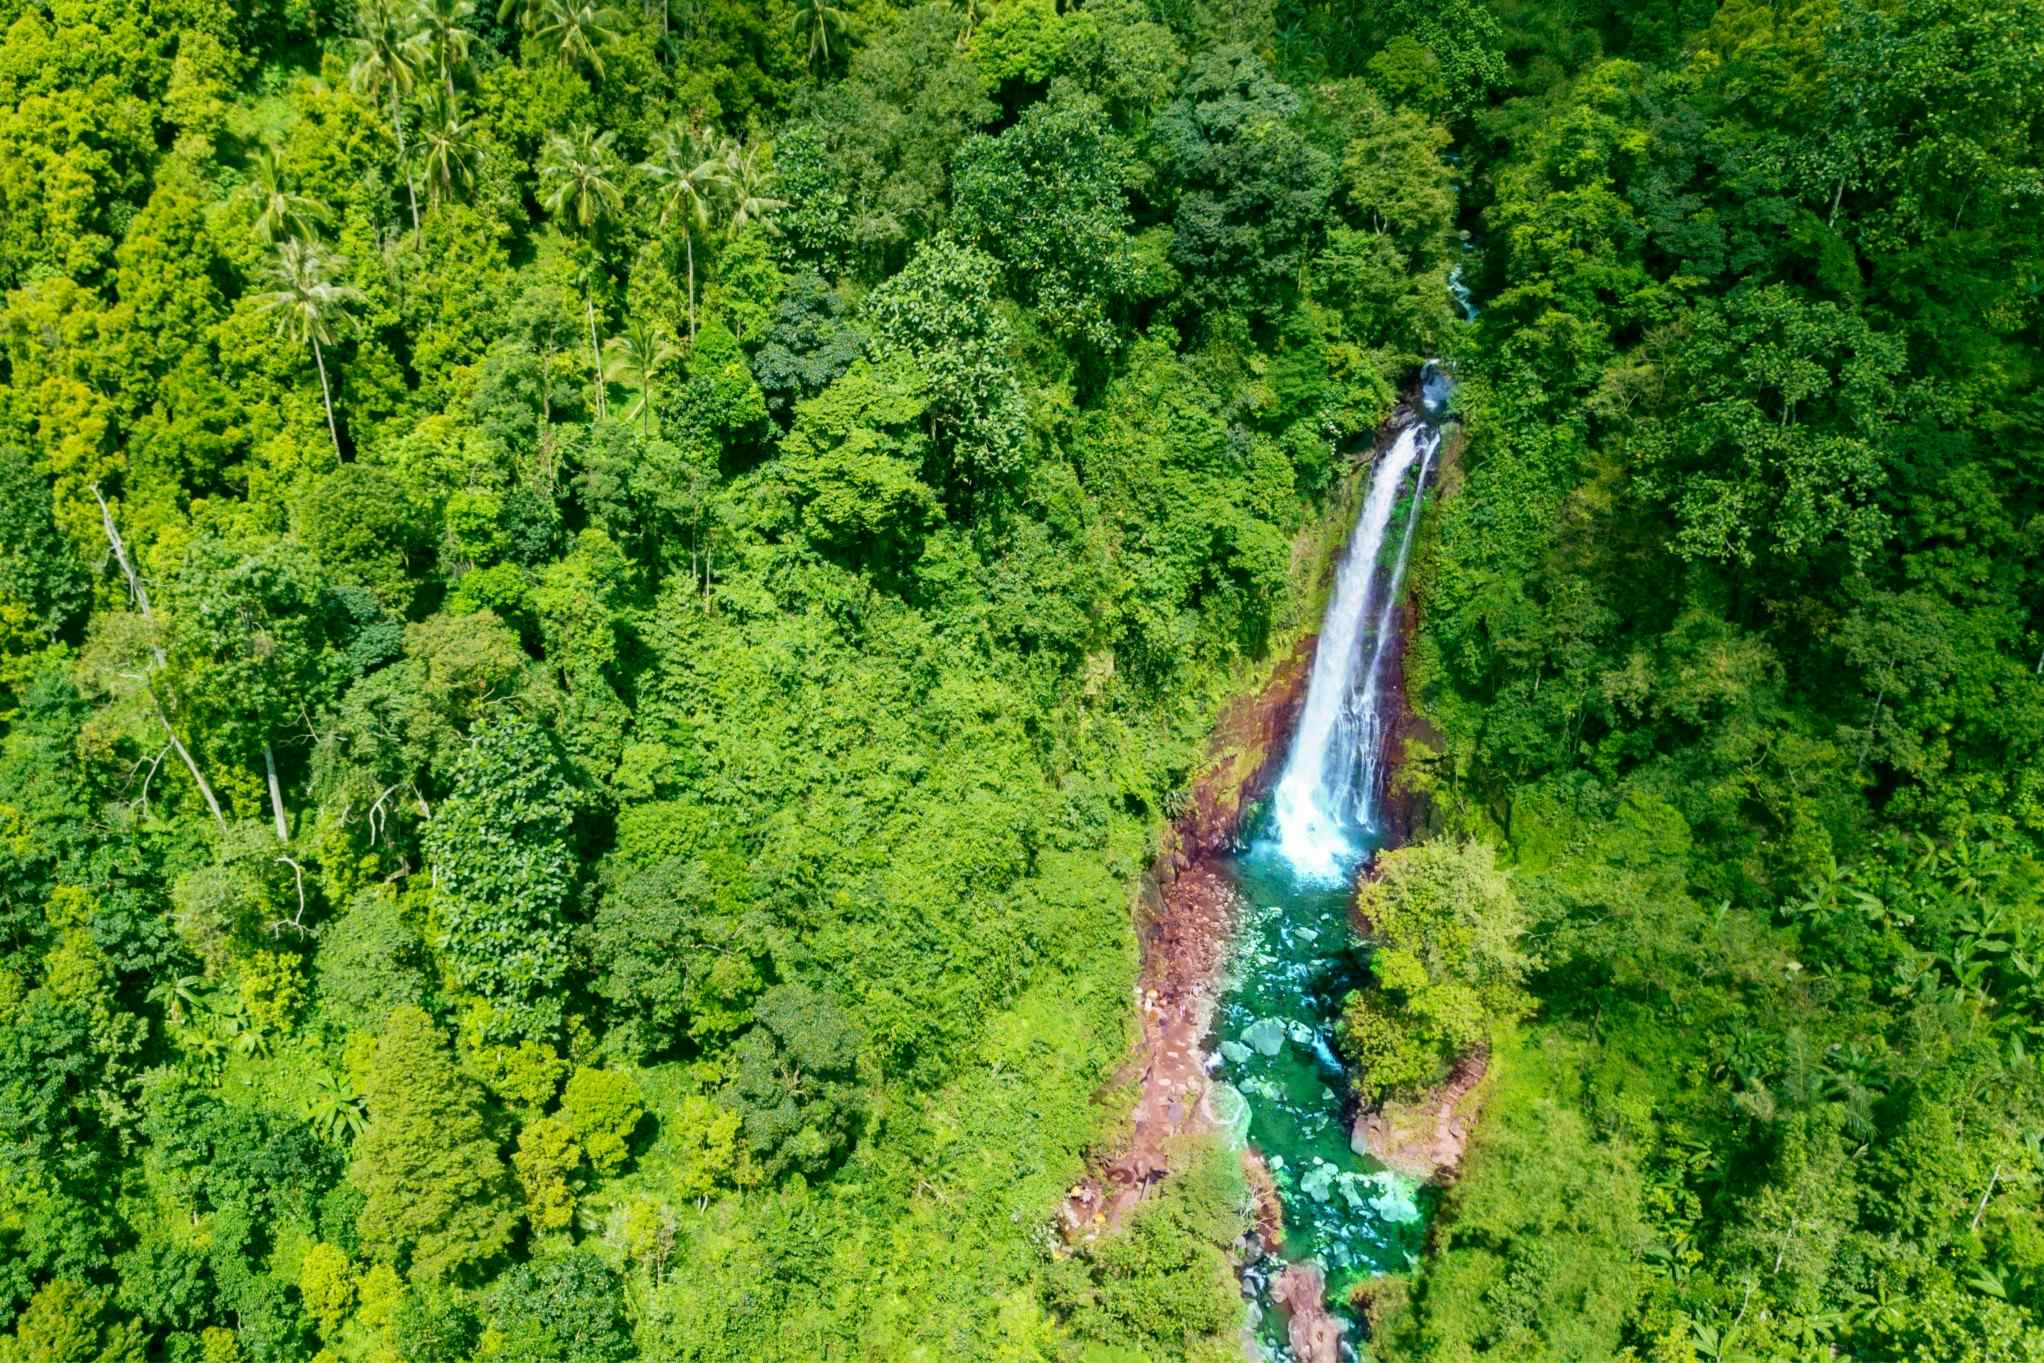 Aerial view of the Gitgit waterfall in Bali, Indonesia
